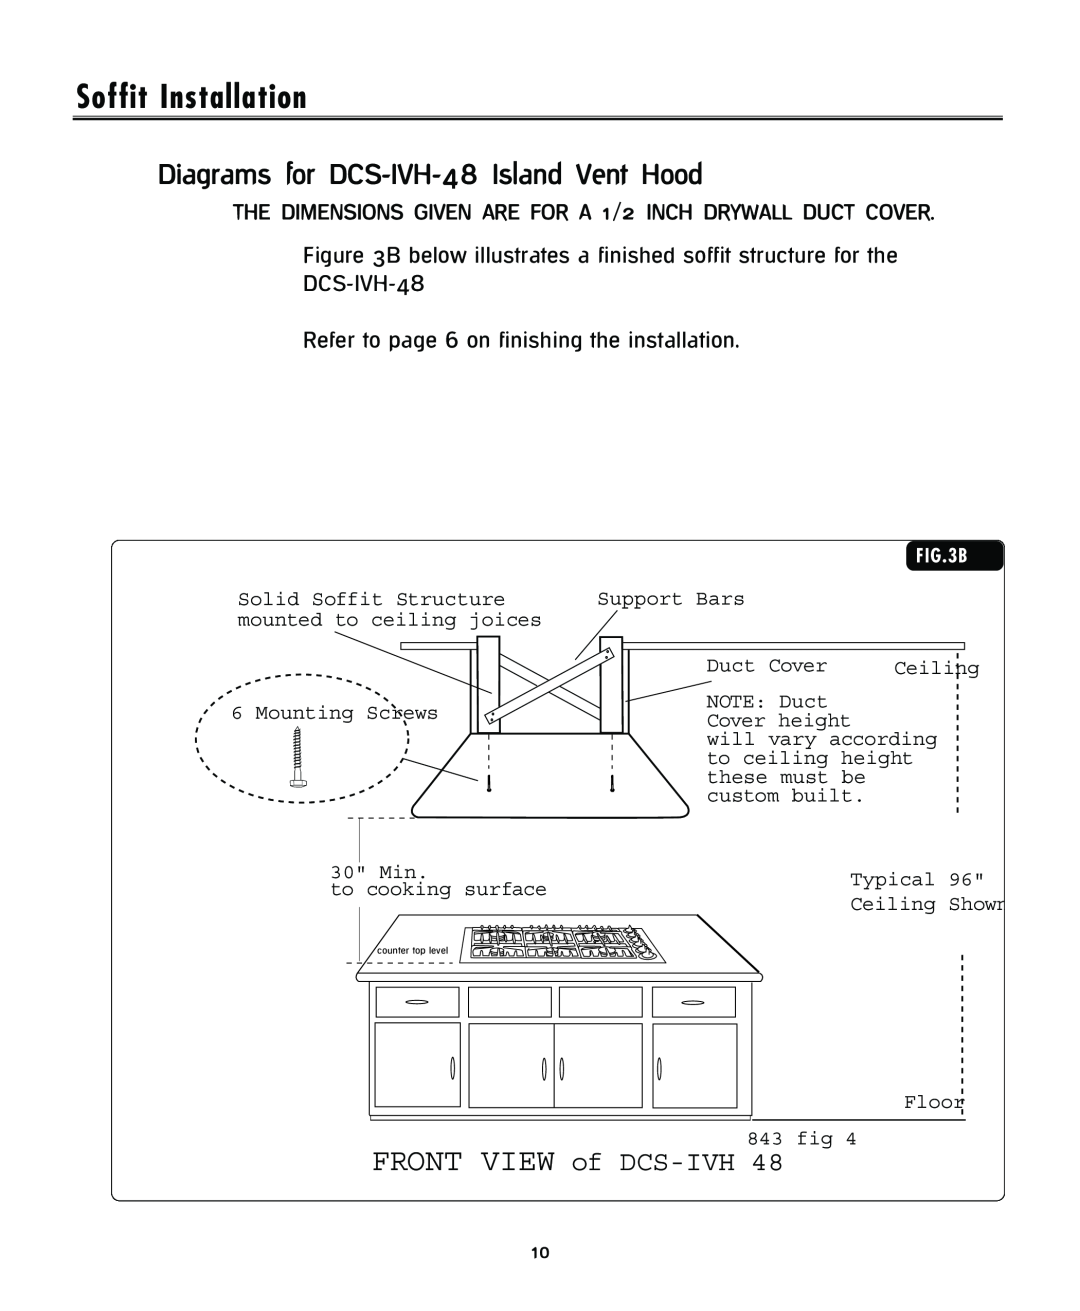 DCS installation instructions Soffit Installation, Diagrams for DCS-IVH-48 Island Vent Hood, FRONT VIEW of DCS-IVH 